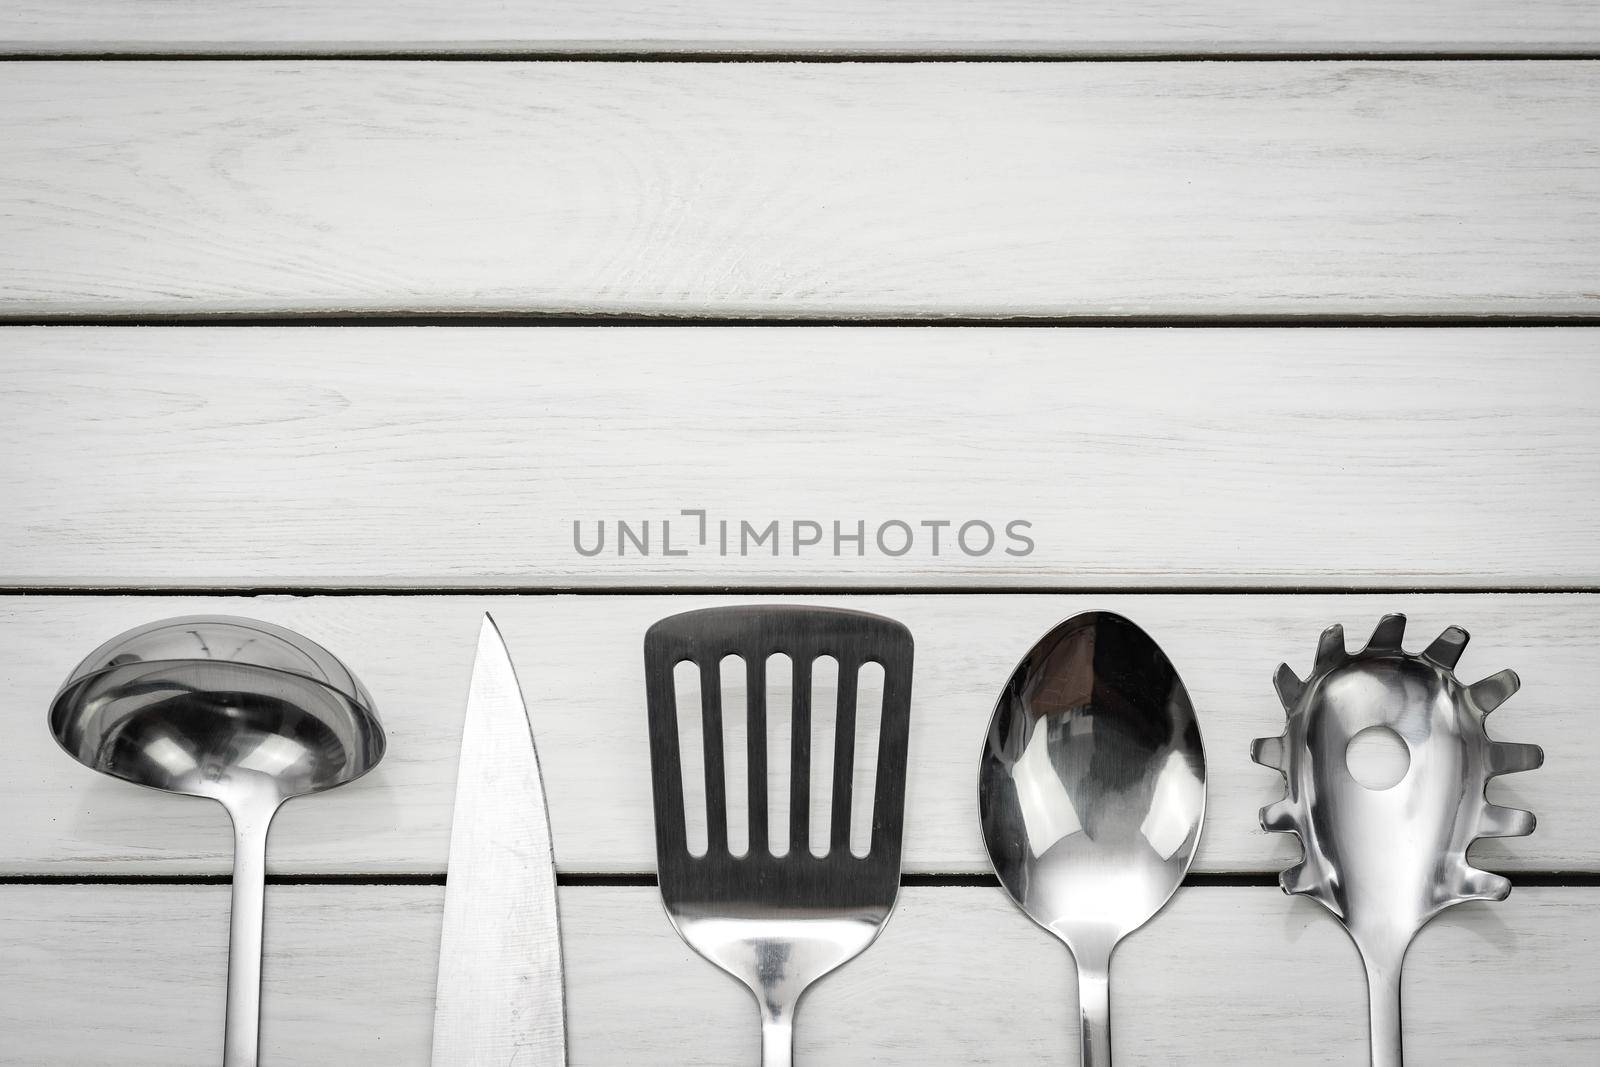 Top view of a silver kitchen utensil collection on a wooden table with copy space.